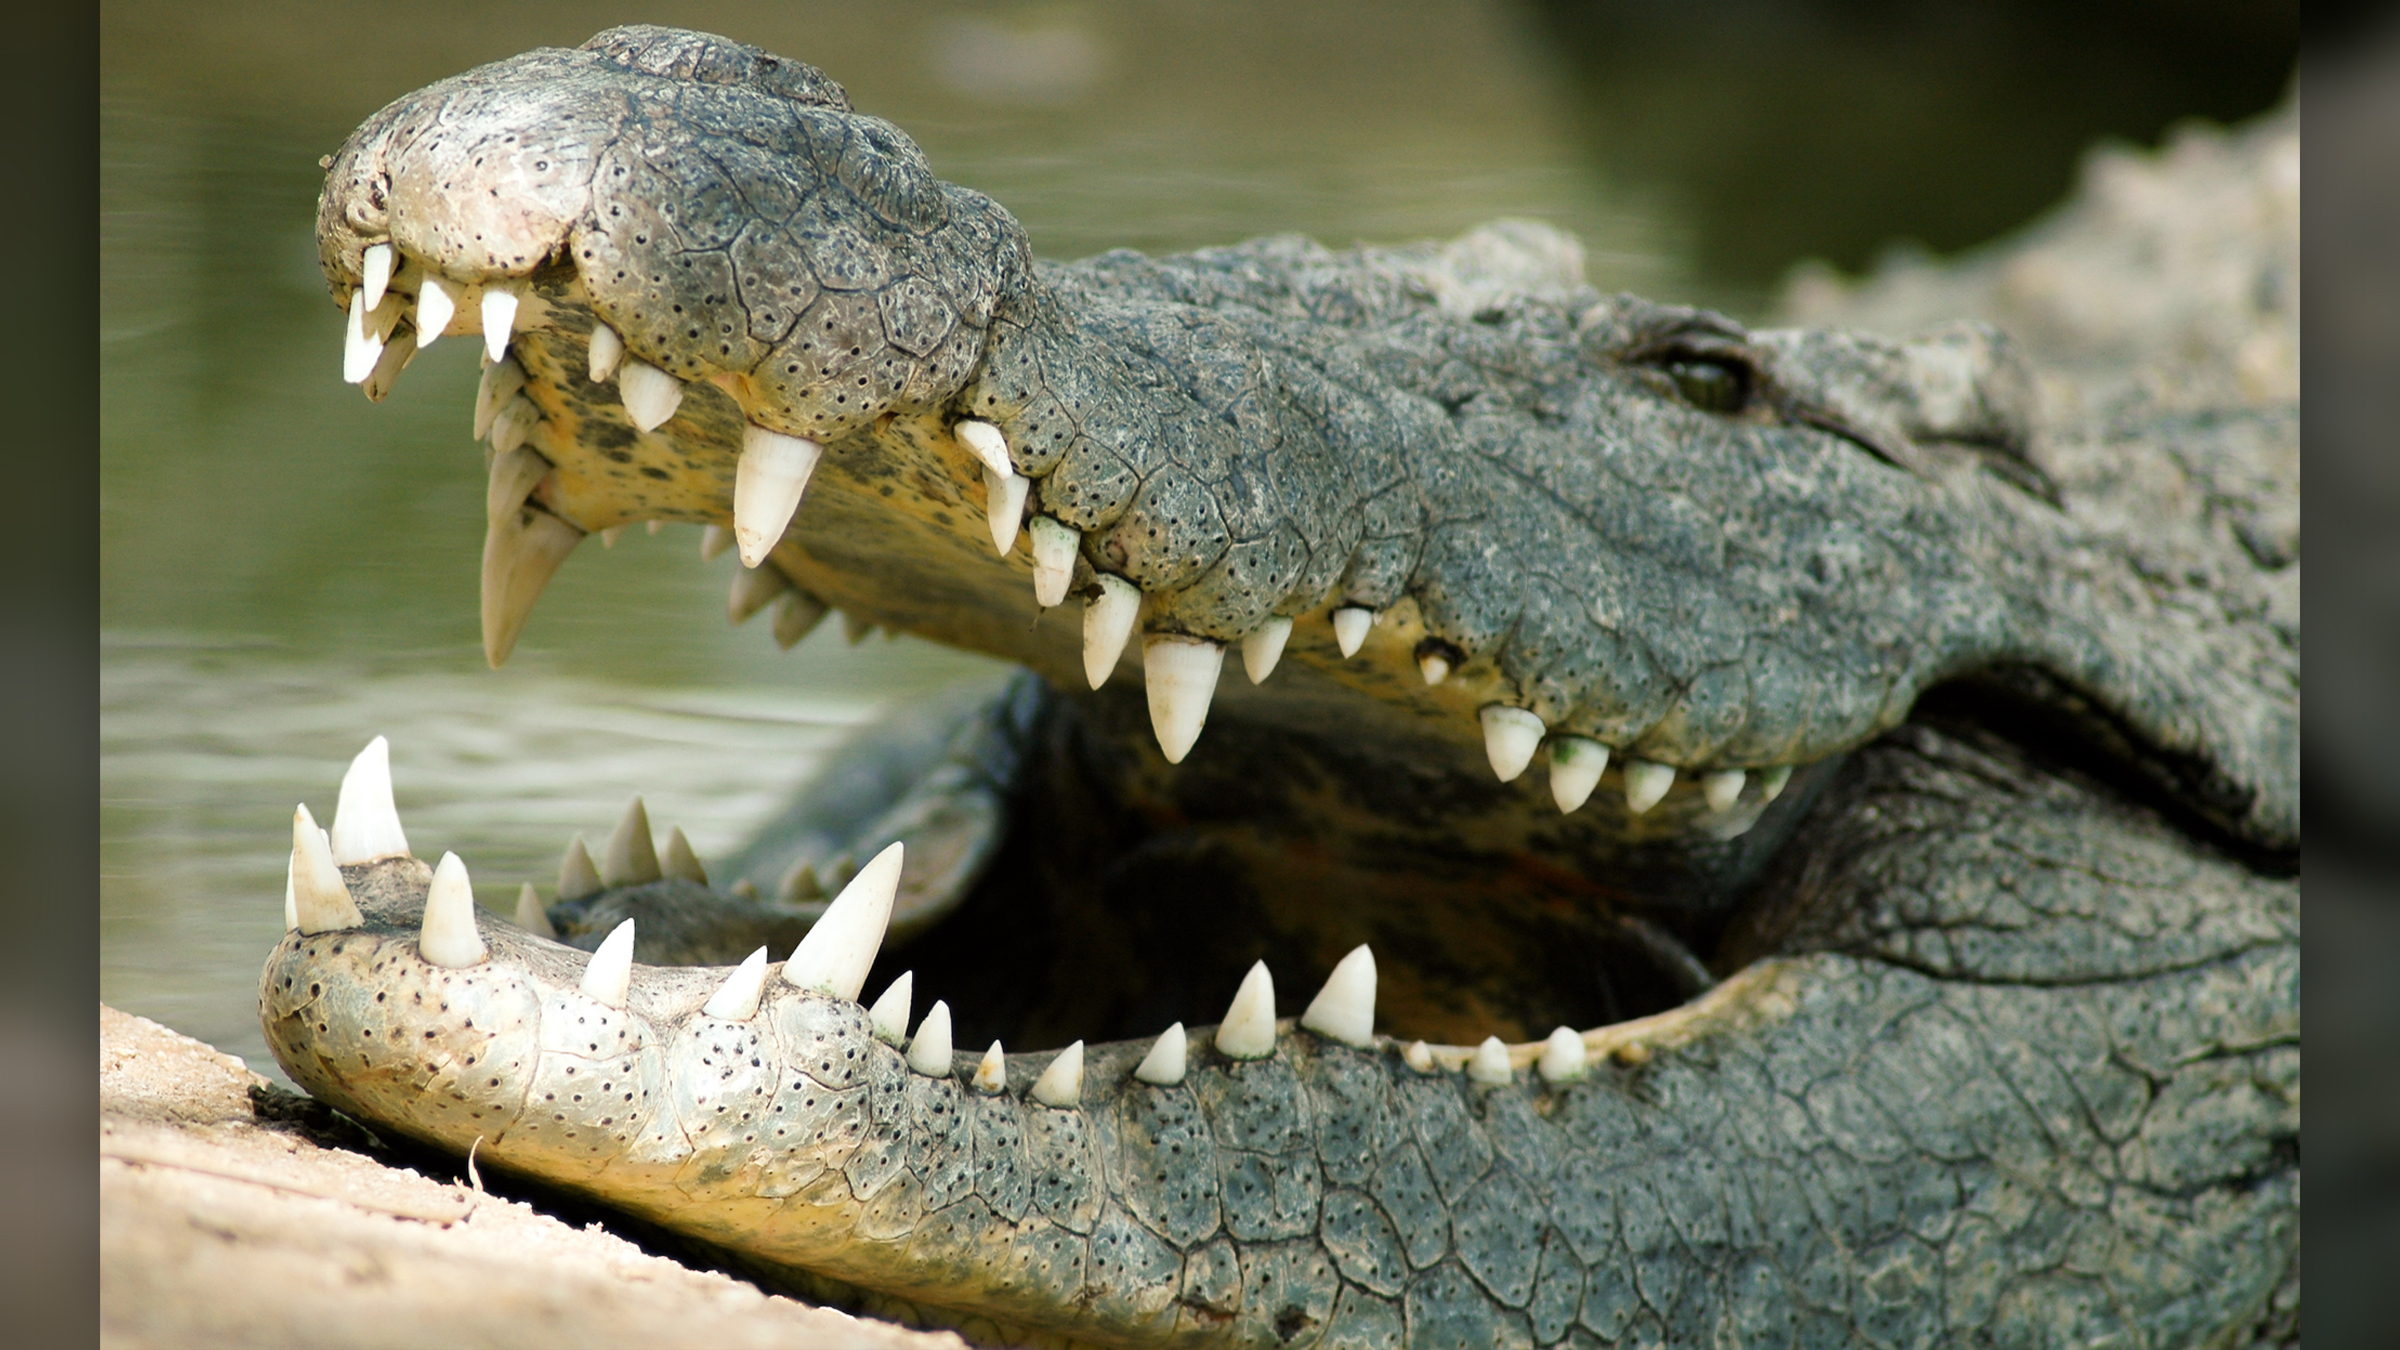 Man survives crocodile attack by prying its jaws off his head. How did he escape such a powerful bite?